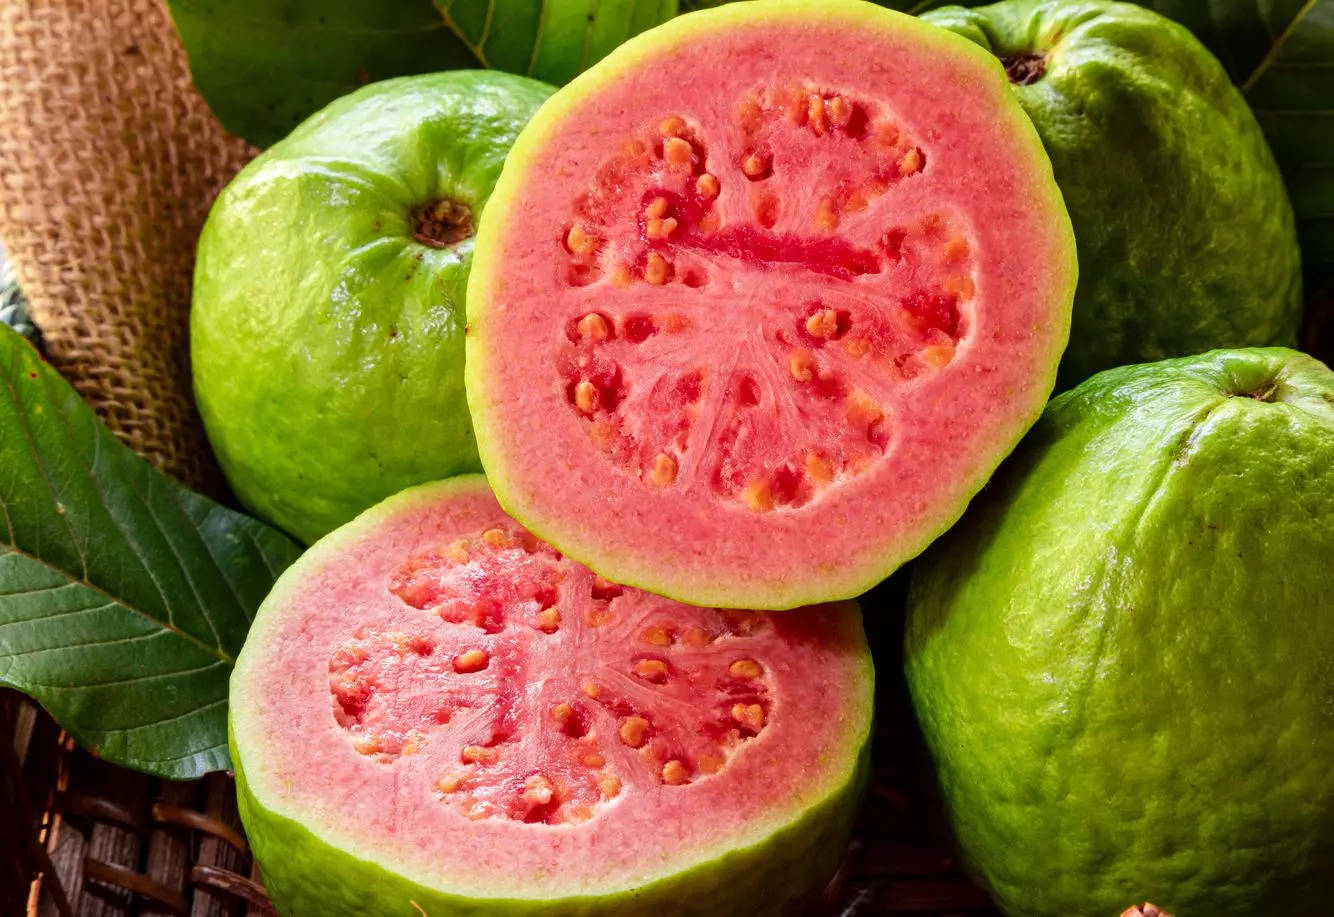 Guavas are a low glycemic index fruit – which means that eating them does not send blood sugar levels skyrocketing. And with the high fibre content, they induce a sense of satiety thereby keeping a tab on calorie intake.